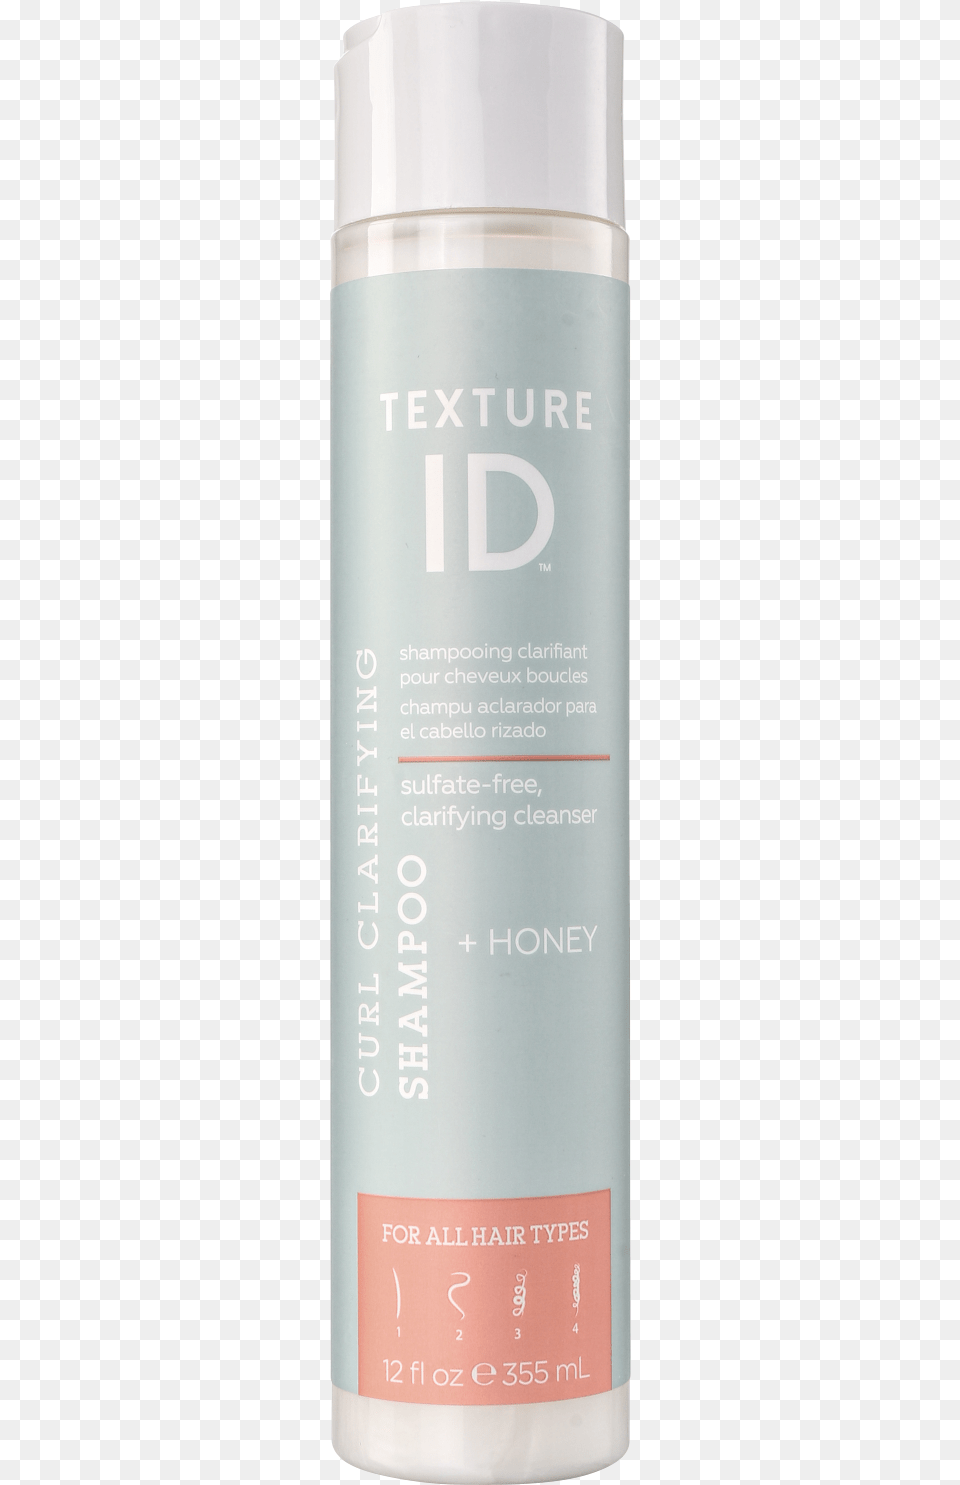 Texture Id Curl Clarifying Shampoo, Cosmetics, Deodorant, Can, Tin Png Image